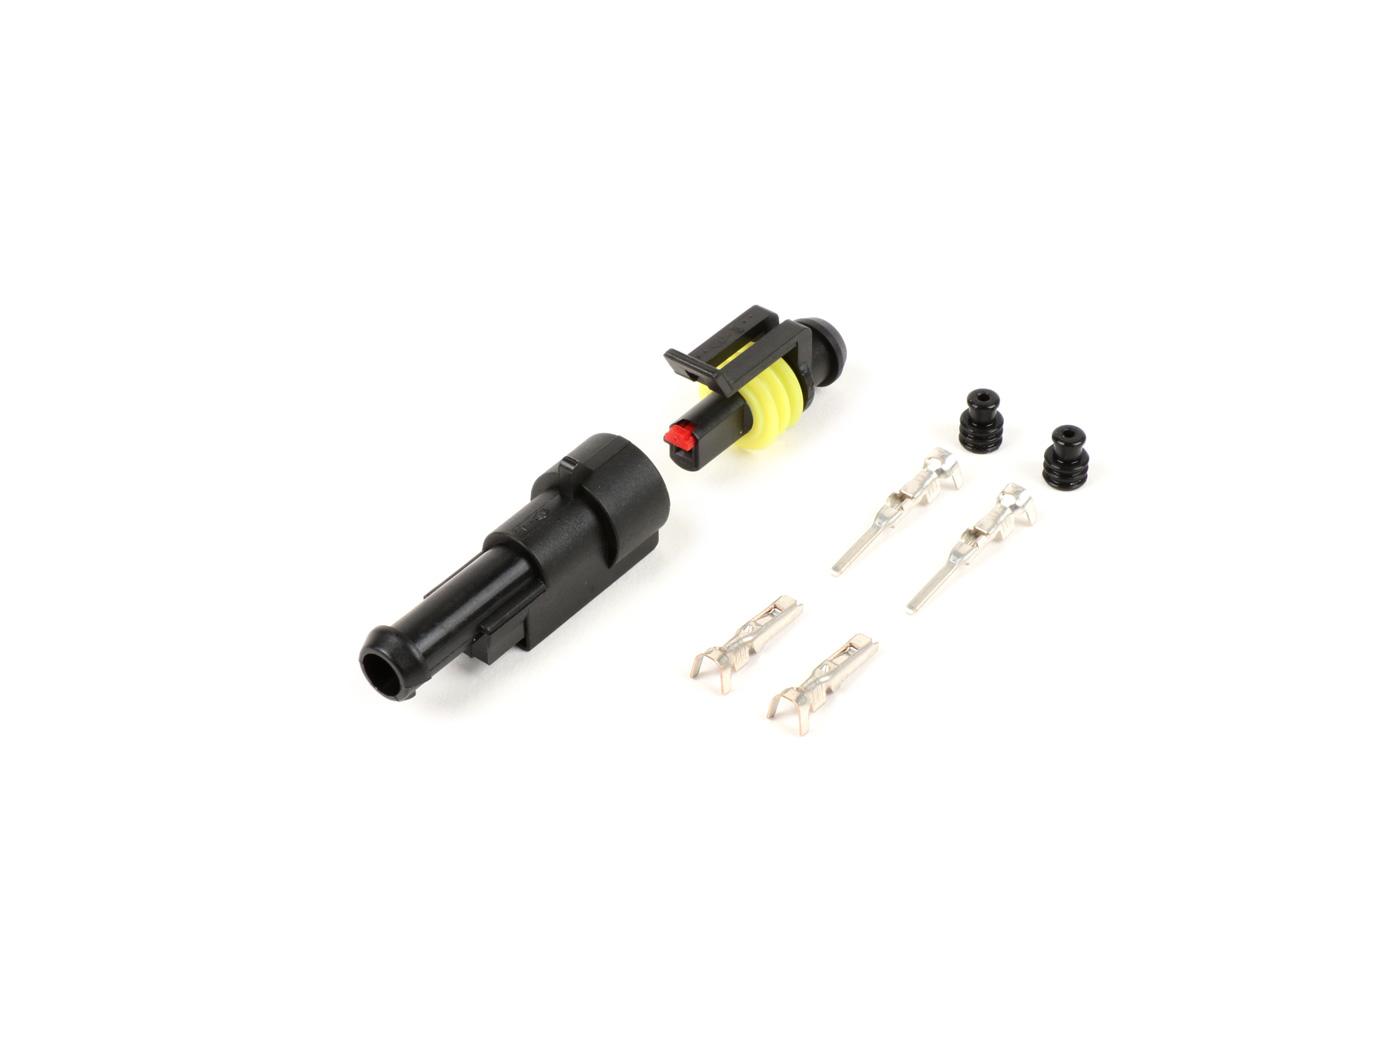 Connector kit for electrical system wiring -BGM PRO- type 060 AM SpecialSeal series, 0.85-1.25mm², waterproof - 1 way